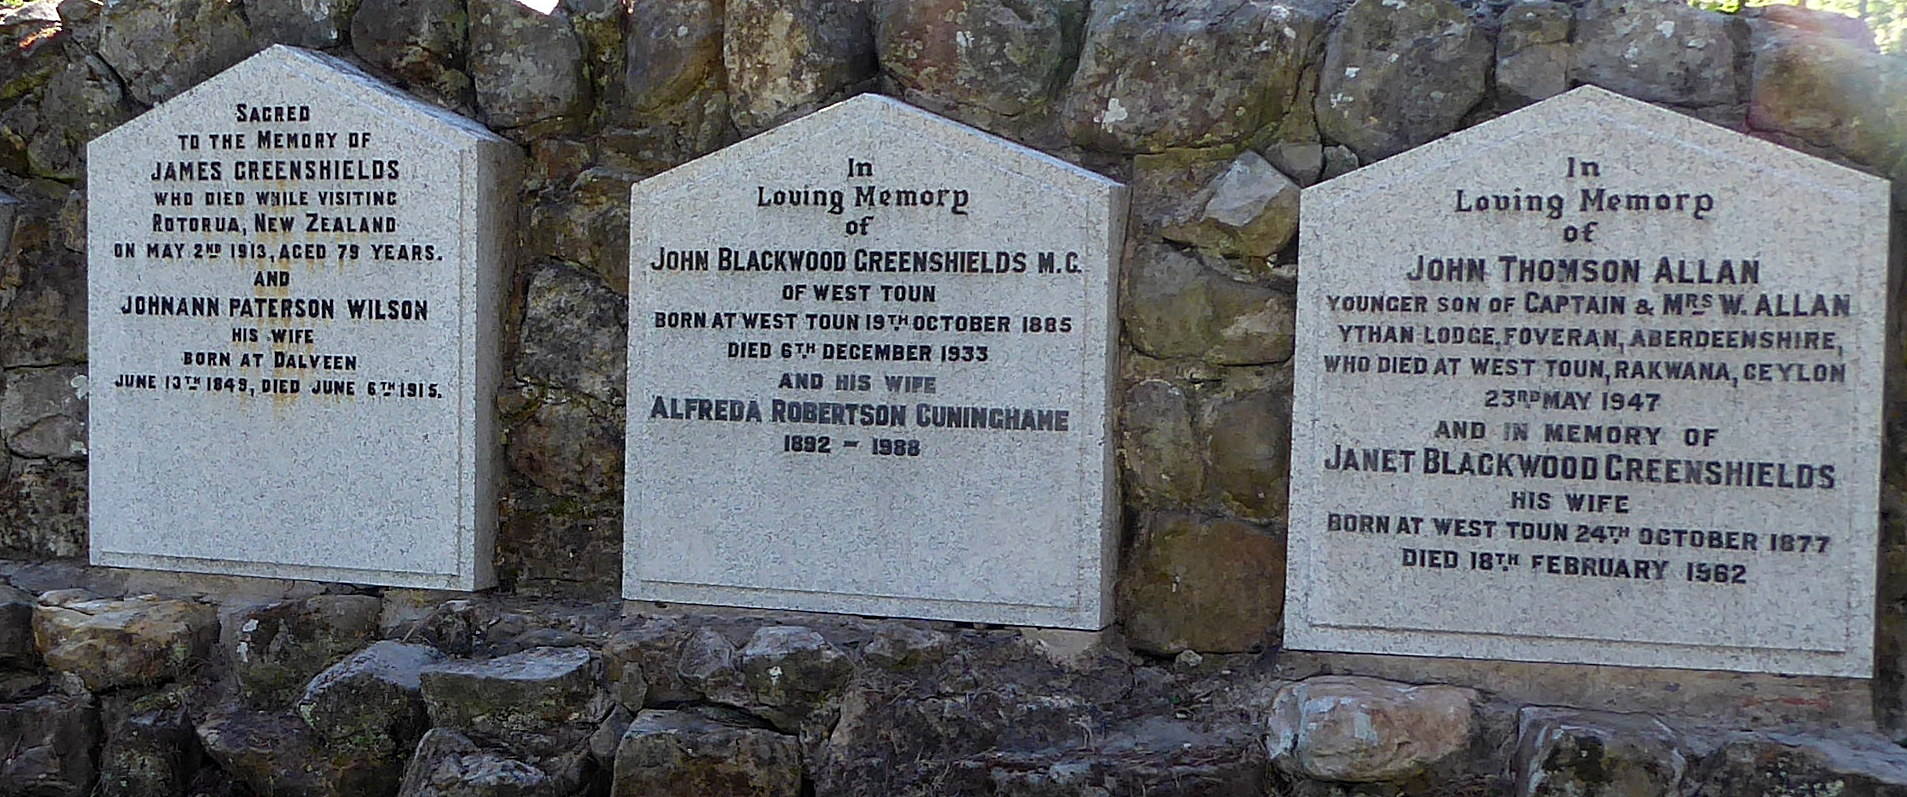 The central three headstones in close-up. Date 24th June 2018